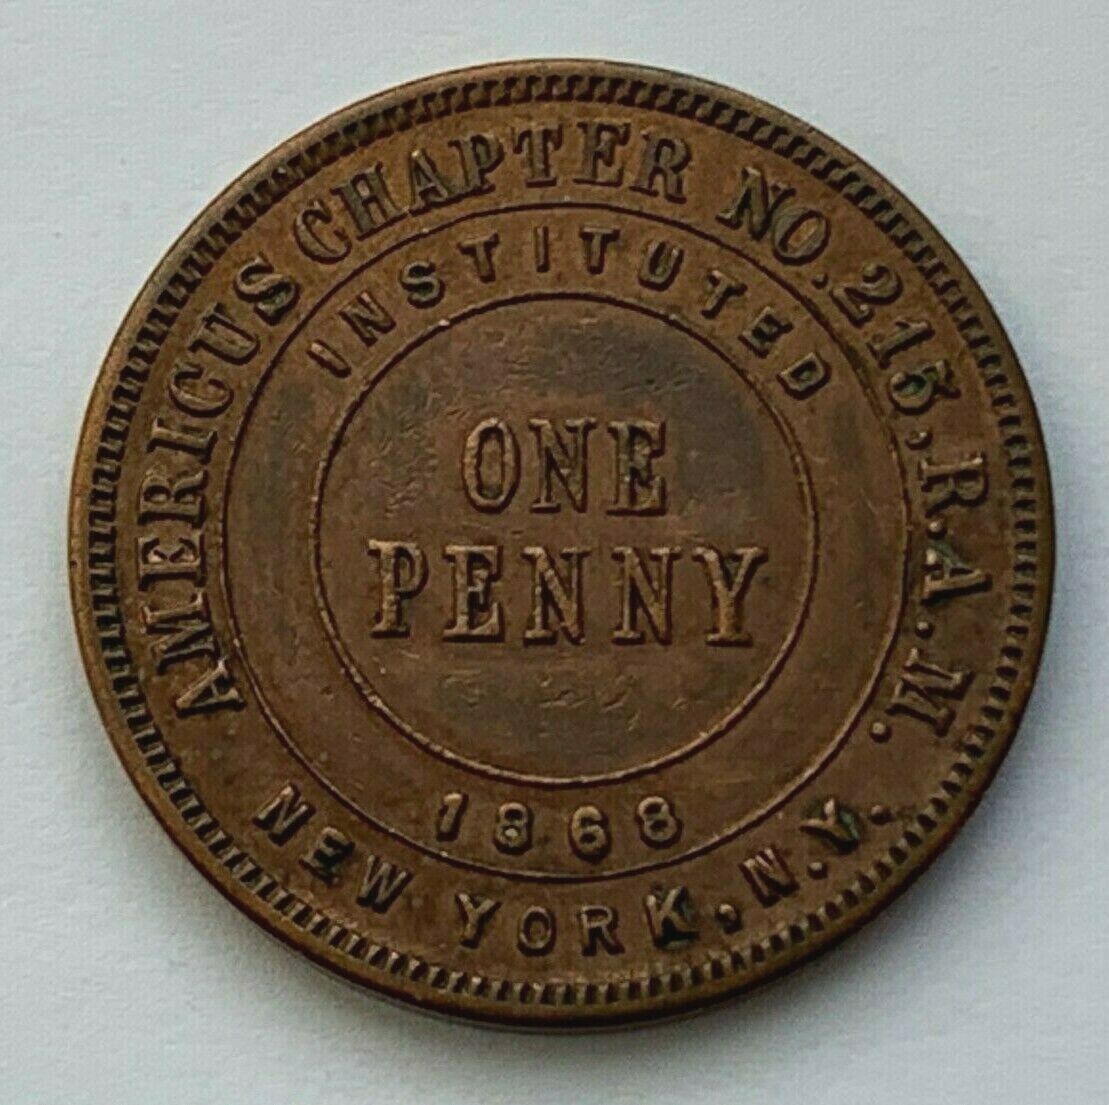 1868 MASONIC ONE PENNY AMERICUS CHAPTER No 215 RAM NEW YORK NY INSTITUTED TOKEN